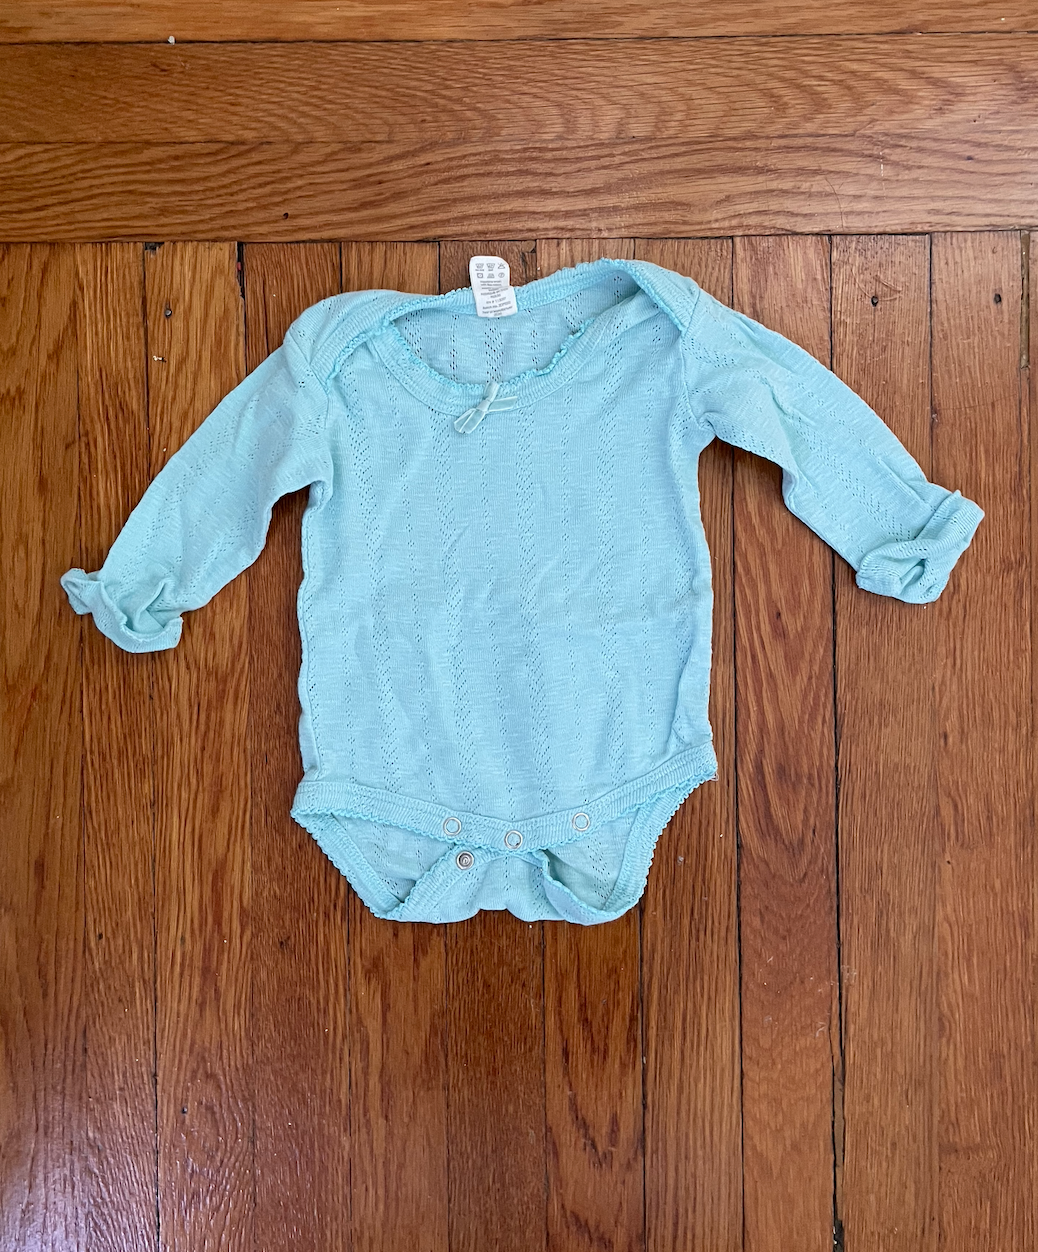 Kate Quinn pointelle onesie - size 3-6 month - light blue - never worn - no tags